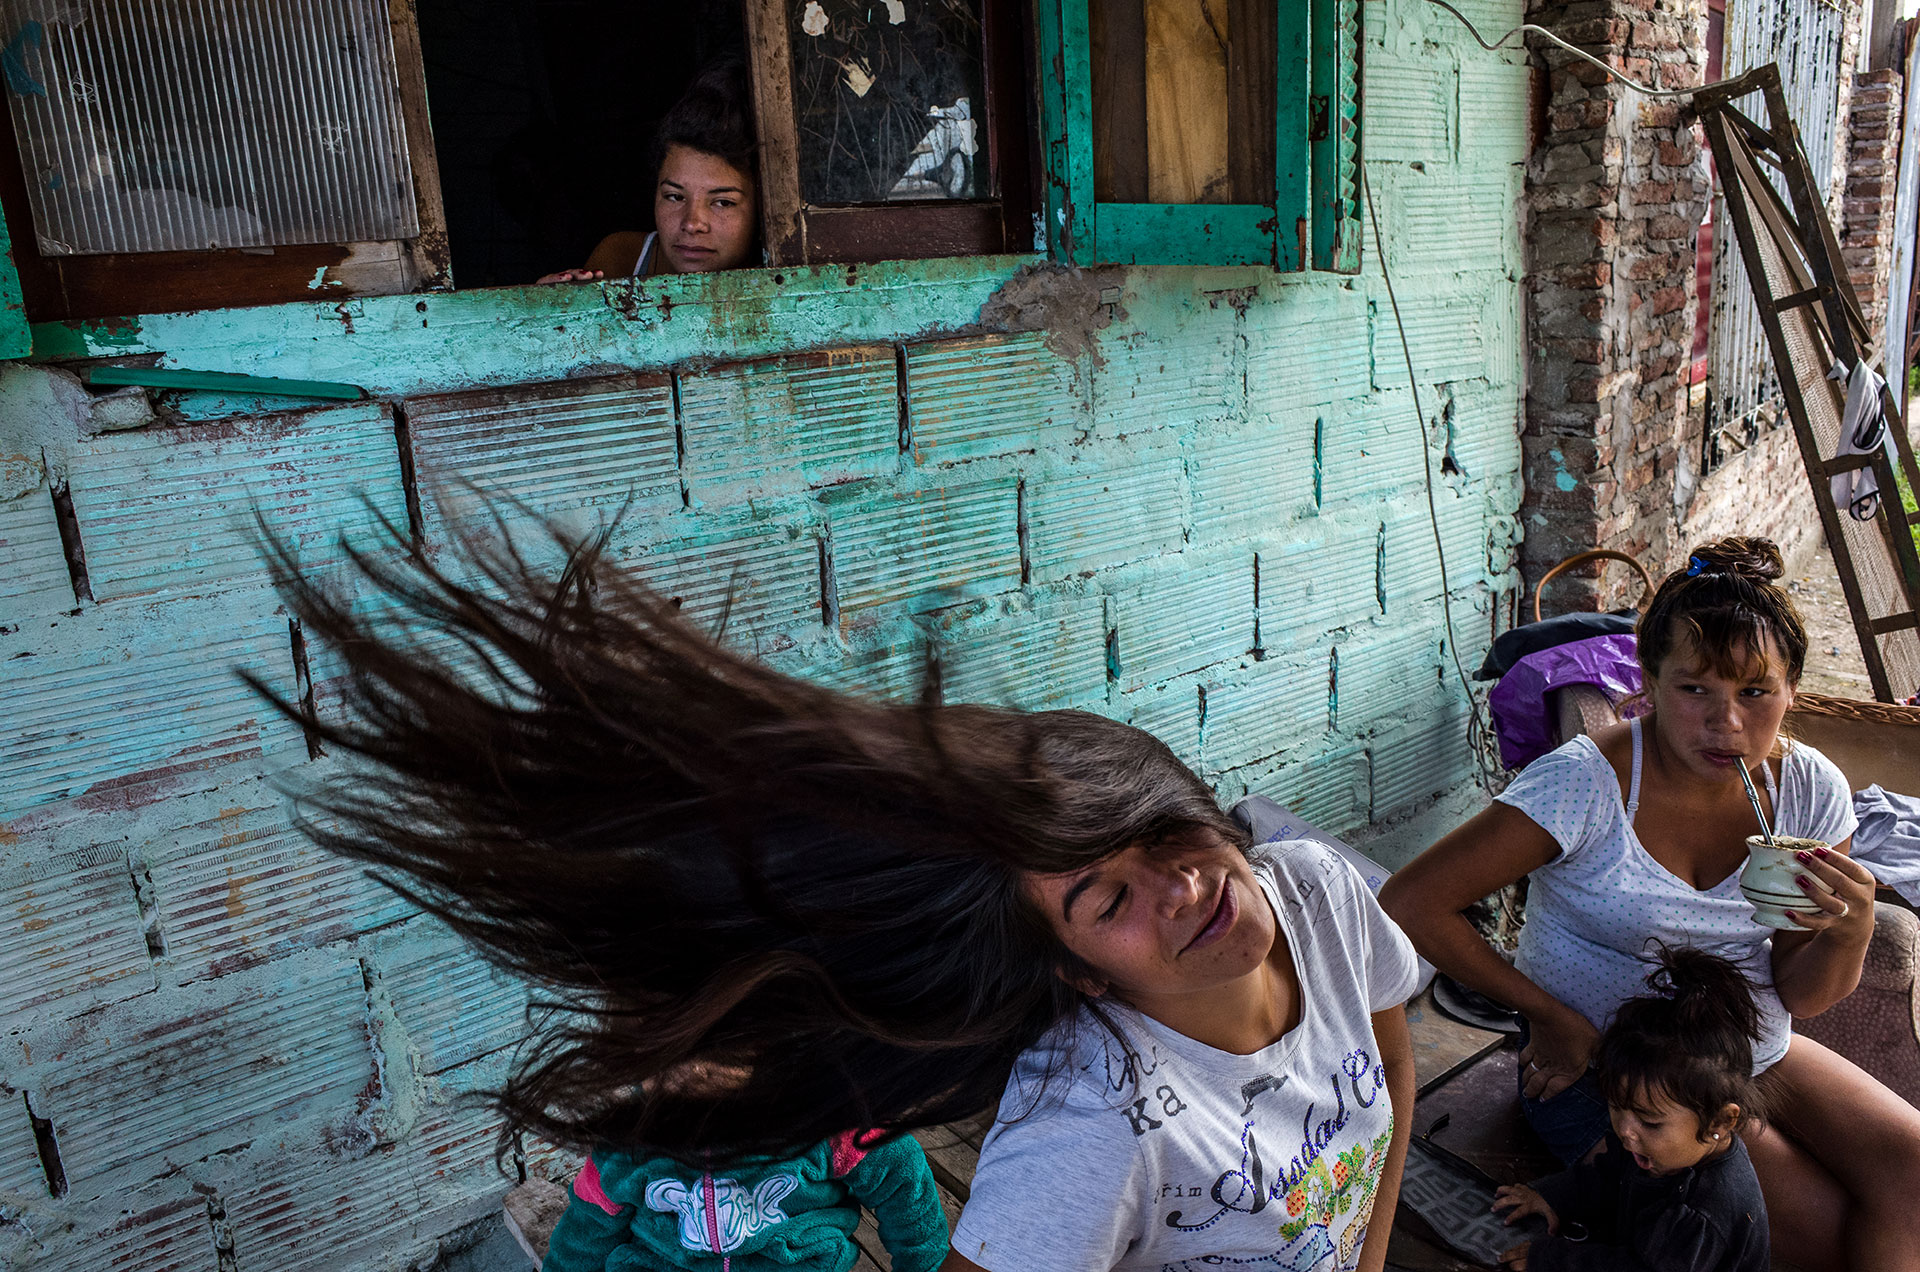 Maira Gimenez, 19 years, in front of her aunt’s house with her cousins. When she was 5, her stepfather began to abuse her and beat the brothers. After her mother’s death her brother started to consume Paco the drug. He was killed by a police officer. In 2016 Maira lost her home due to a fire.